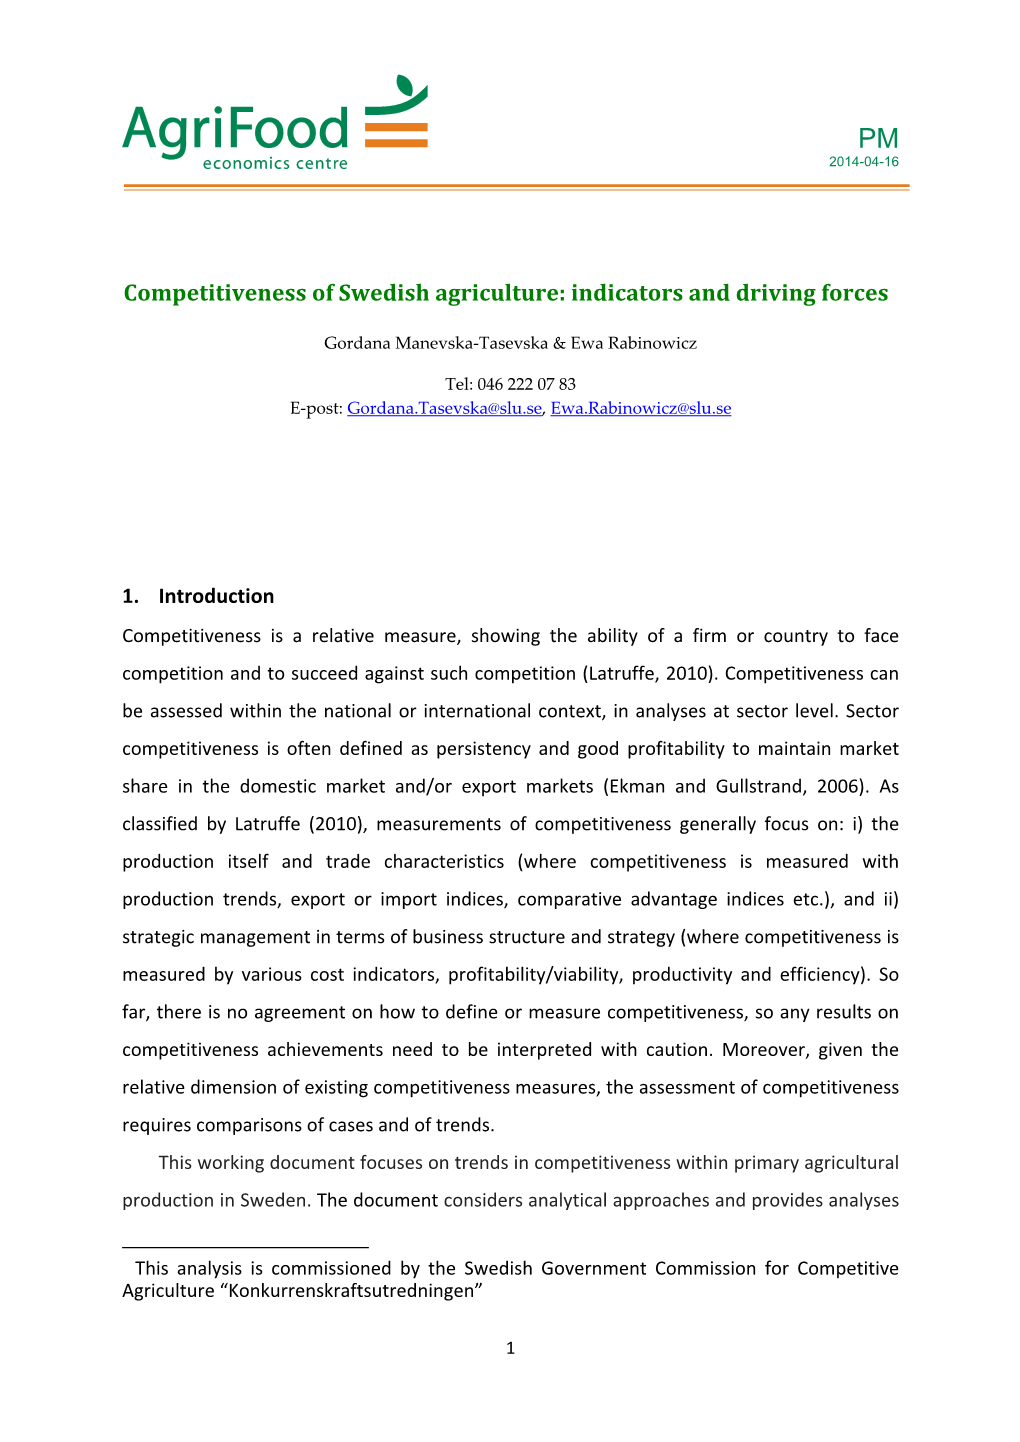 Competitiveness of Swedish Agriculture: Indicators and Driving Forces1